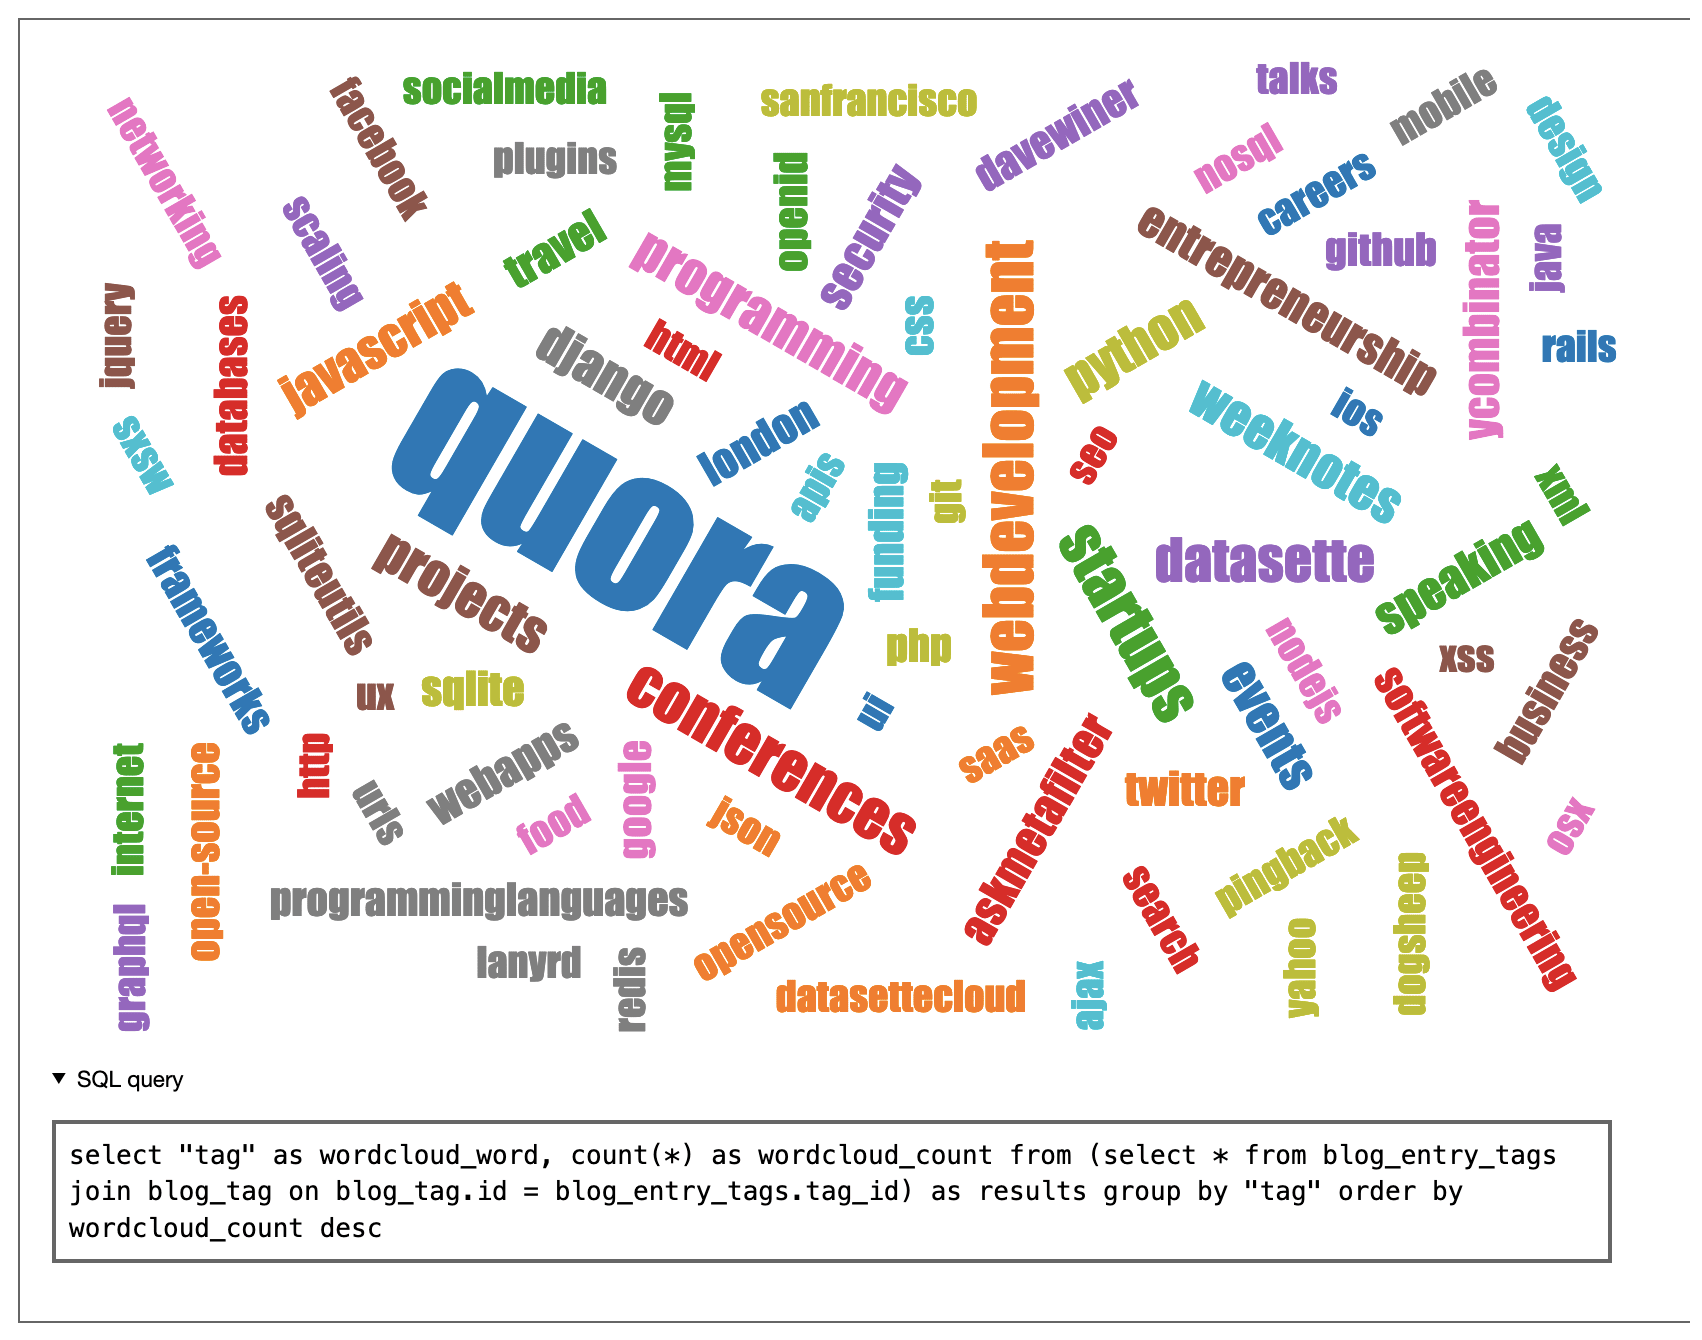 Output of the word cloud widget